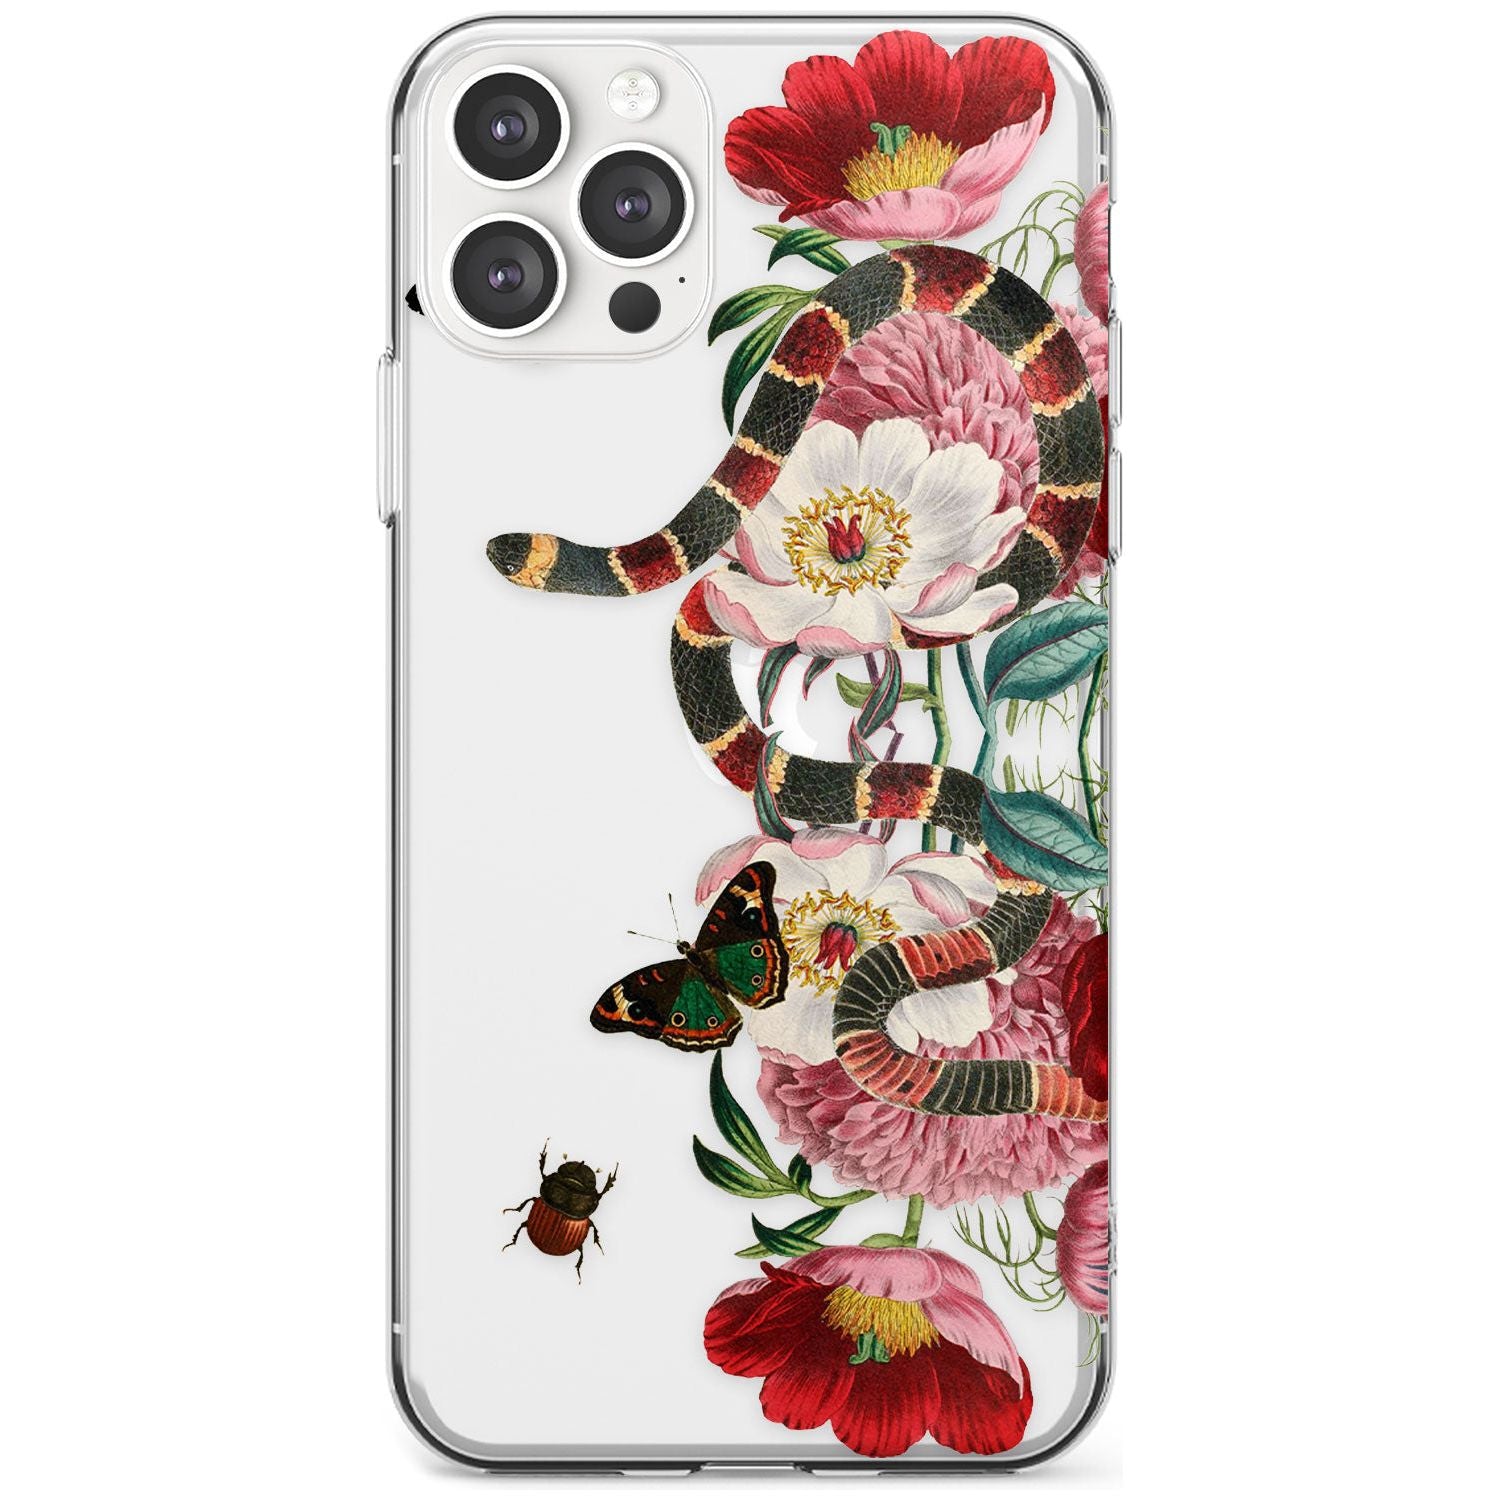 Floral Snake Black Impact Phone Case for iPhone 11 Pro Max